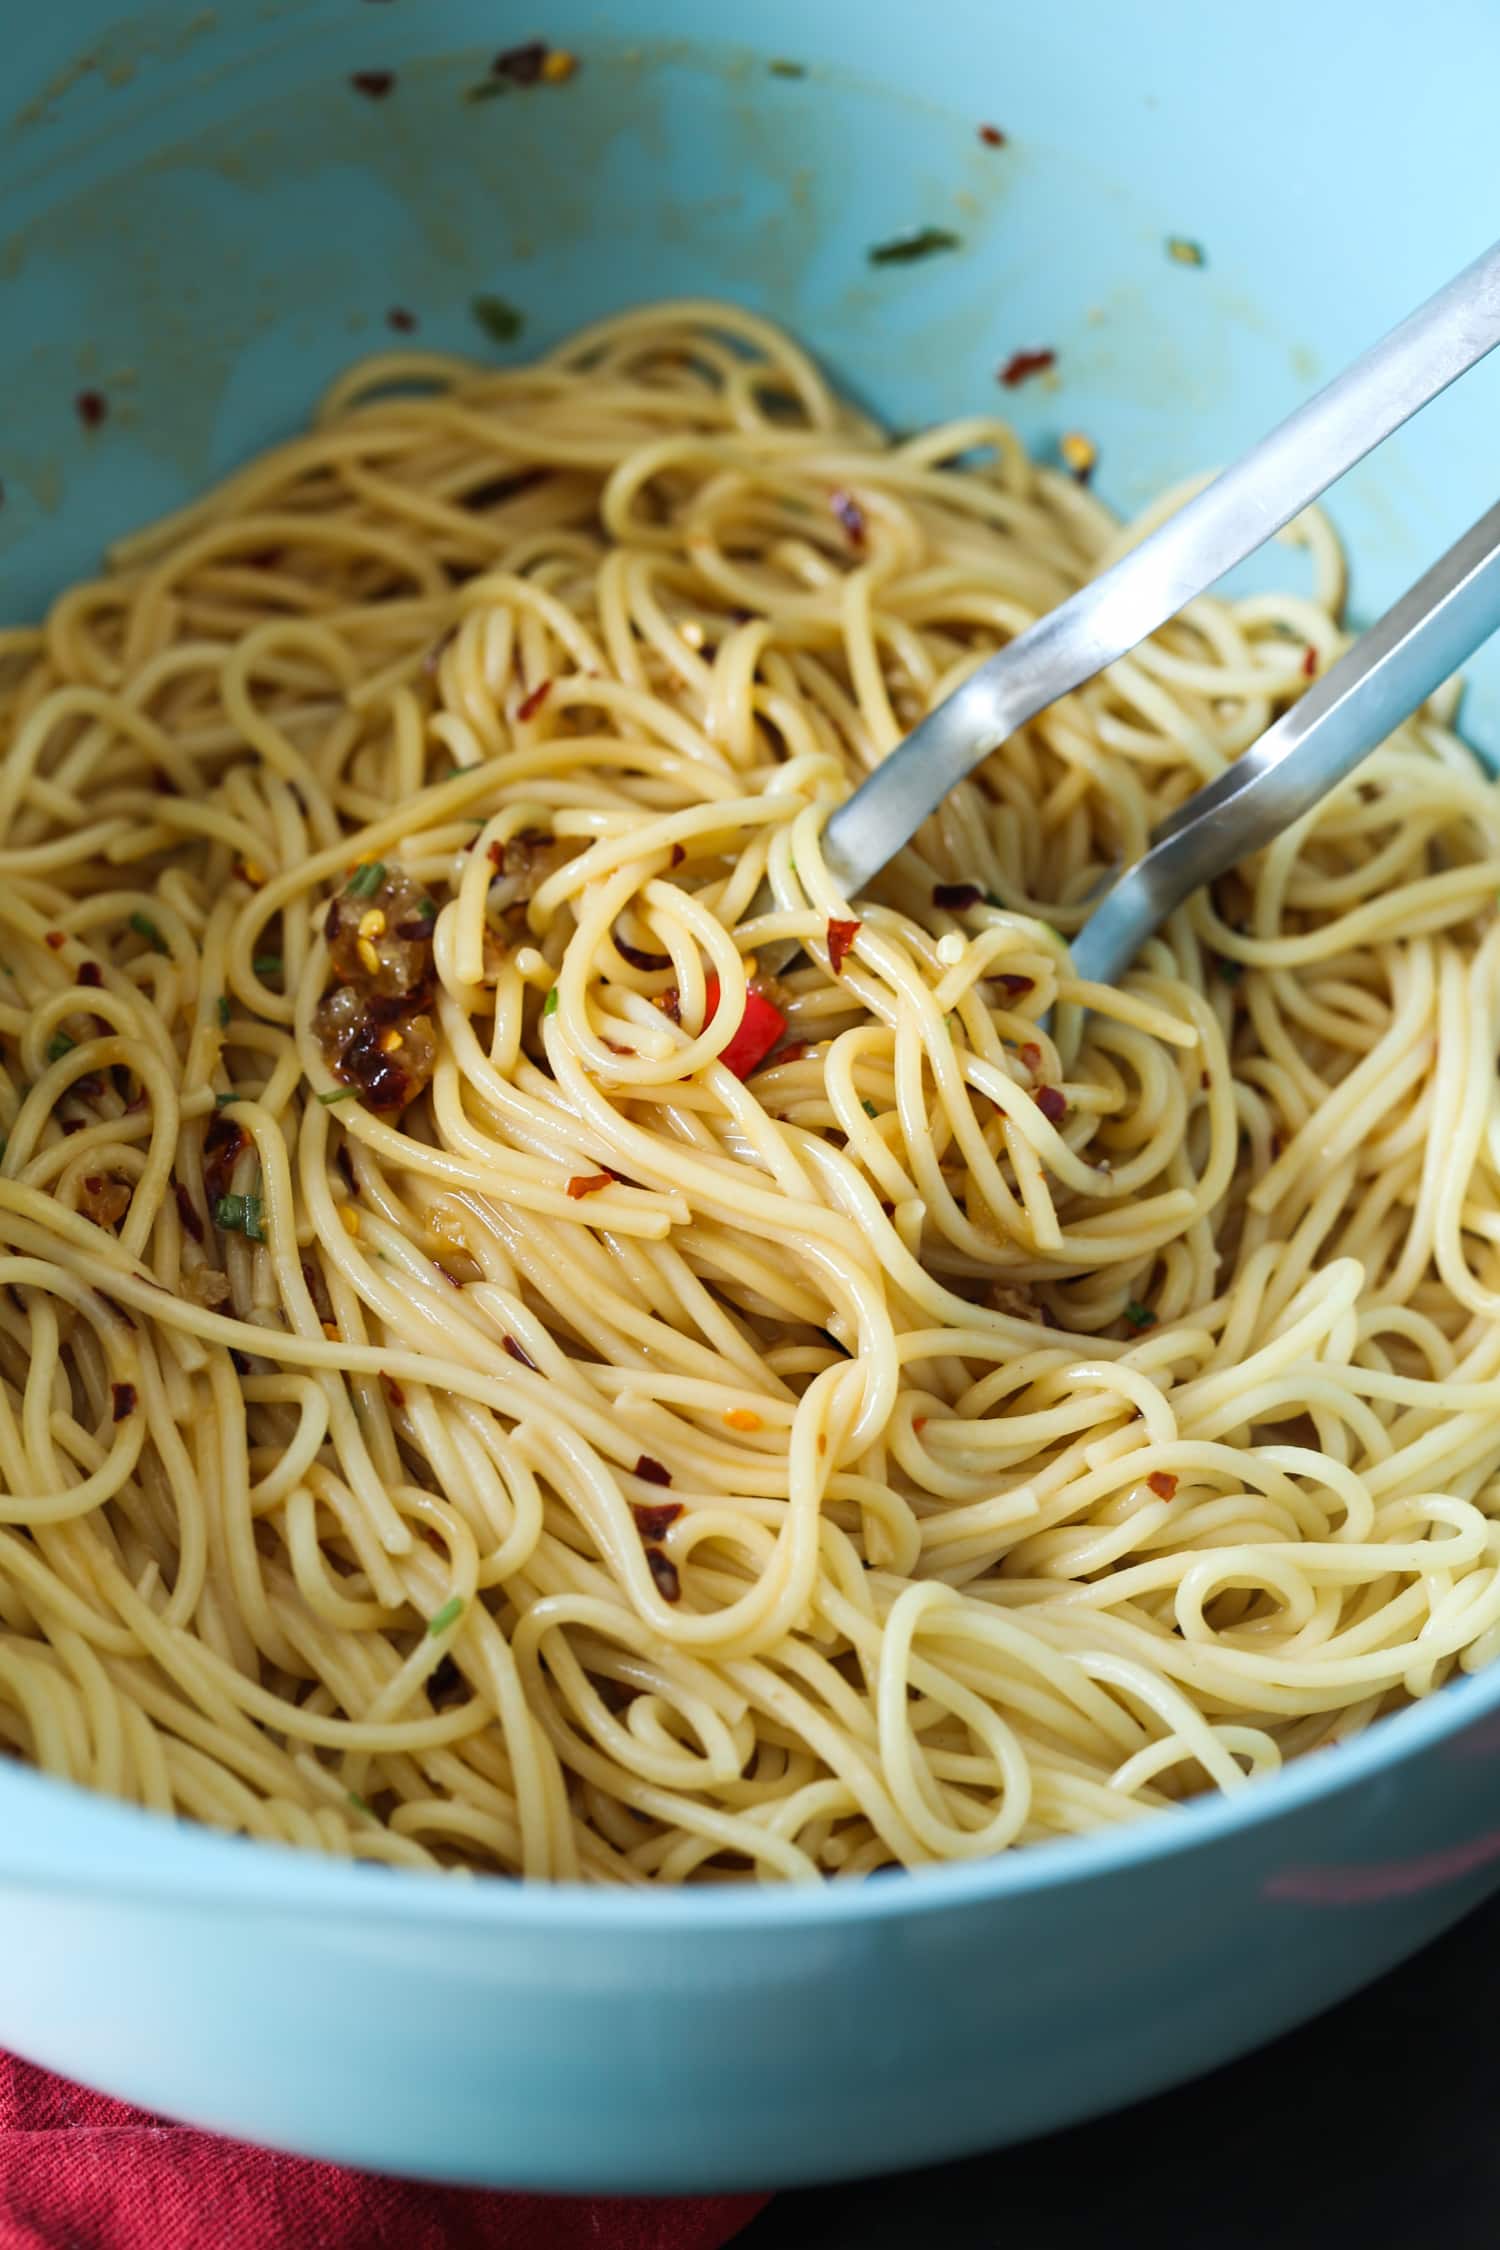 Tongs are used to toss linguine in spicy sesame peanut sauce.